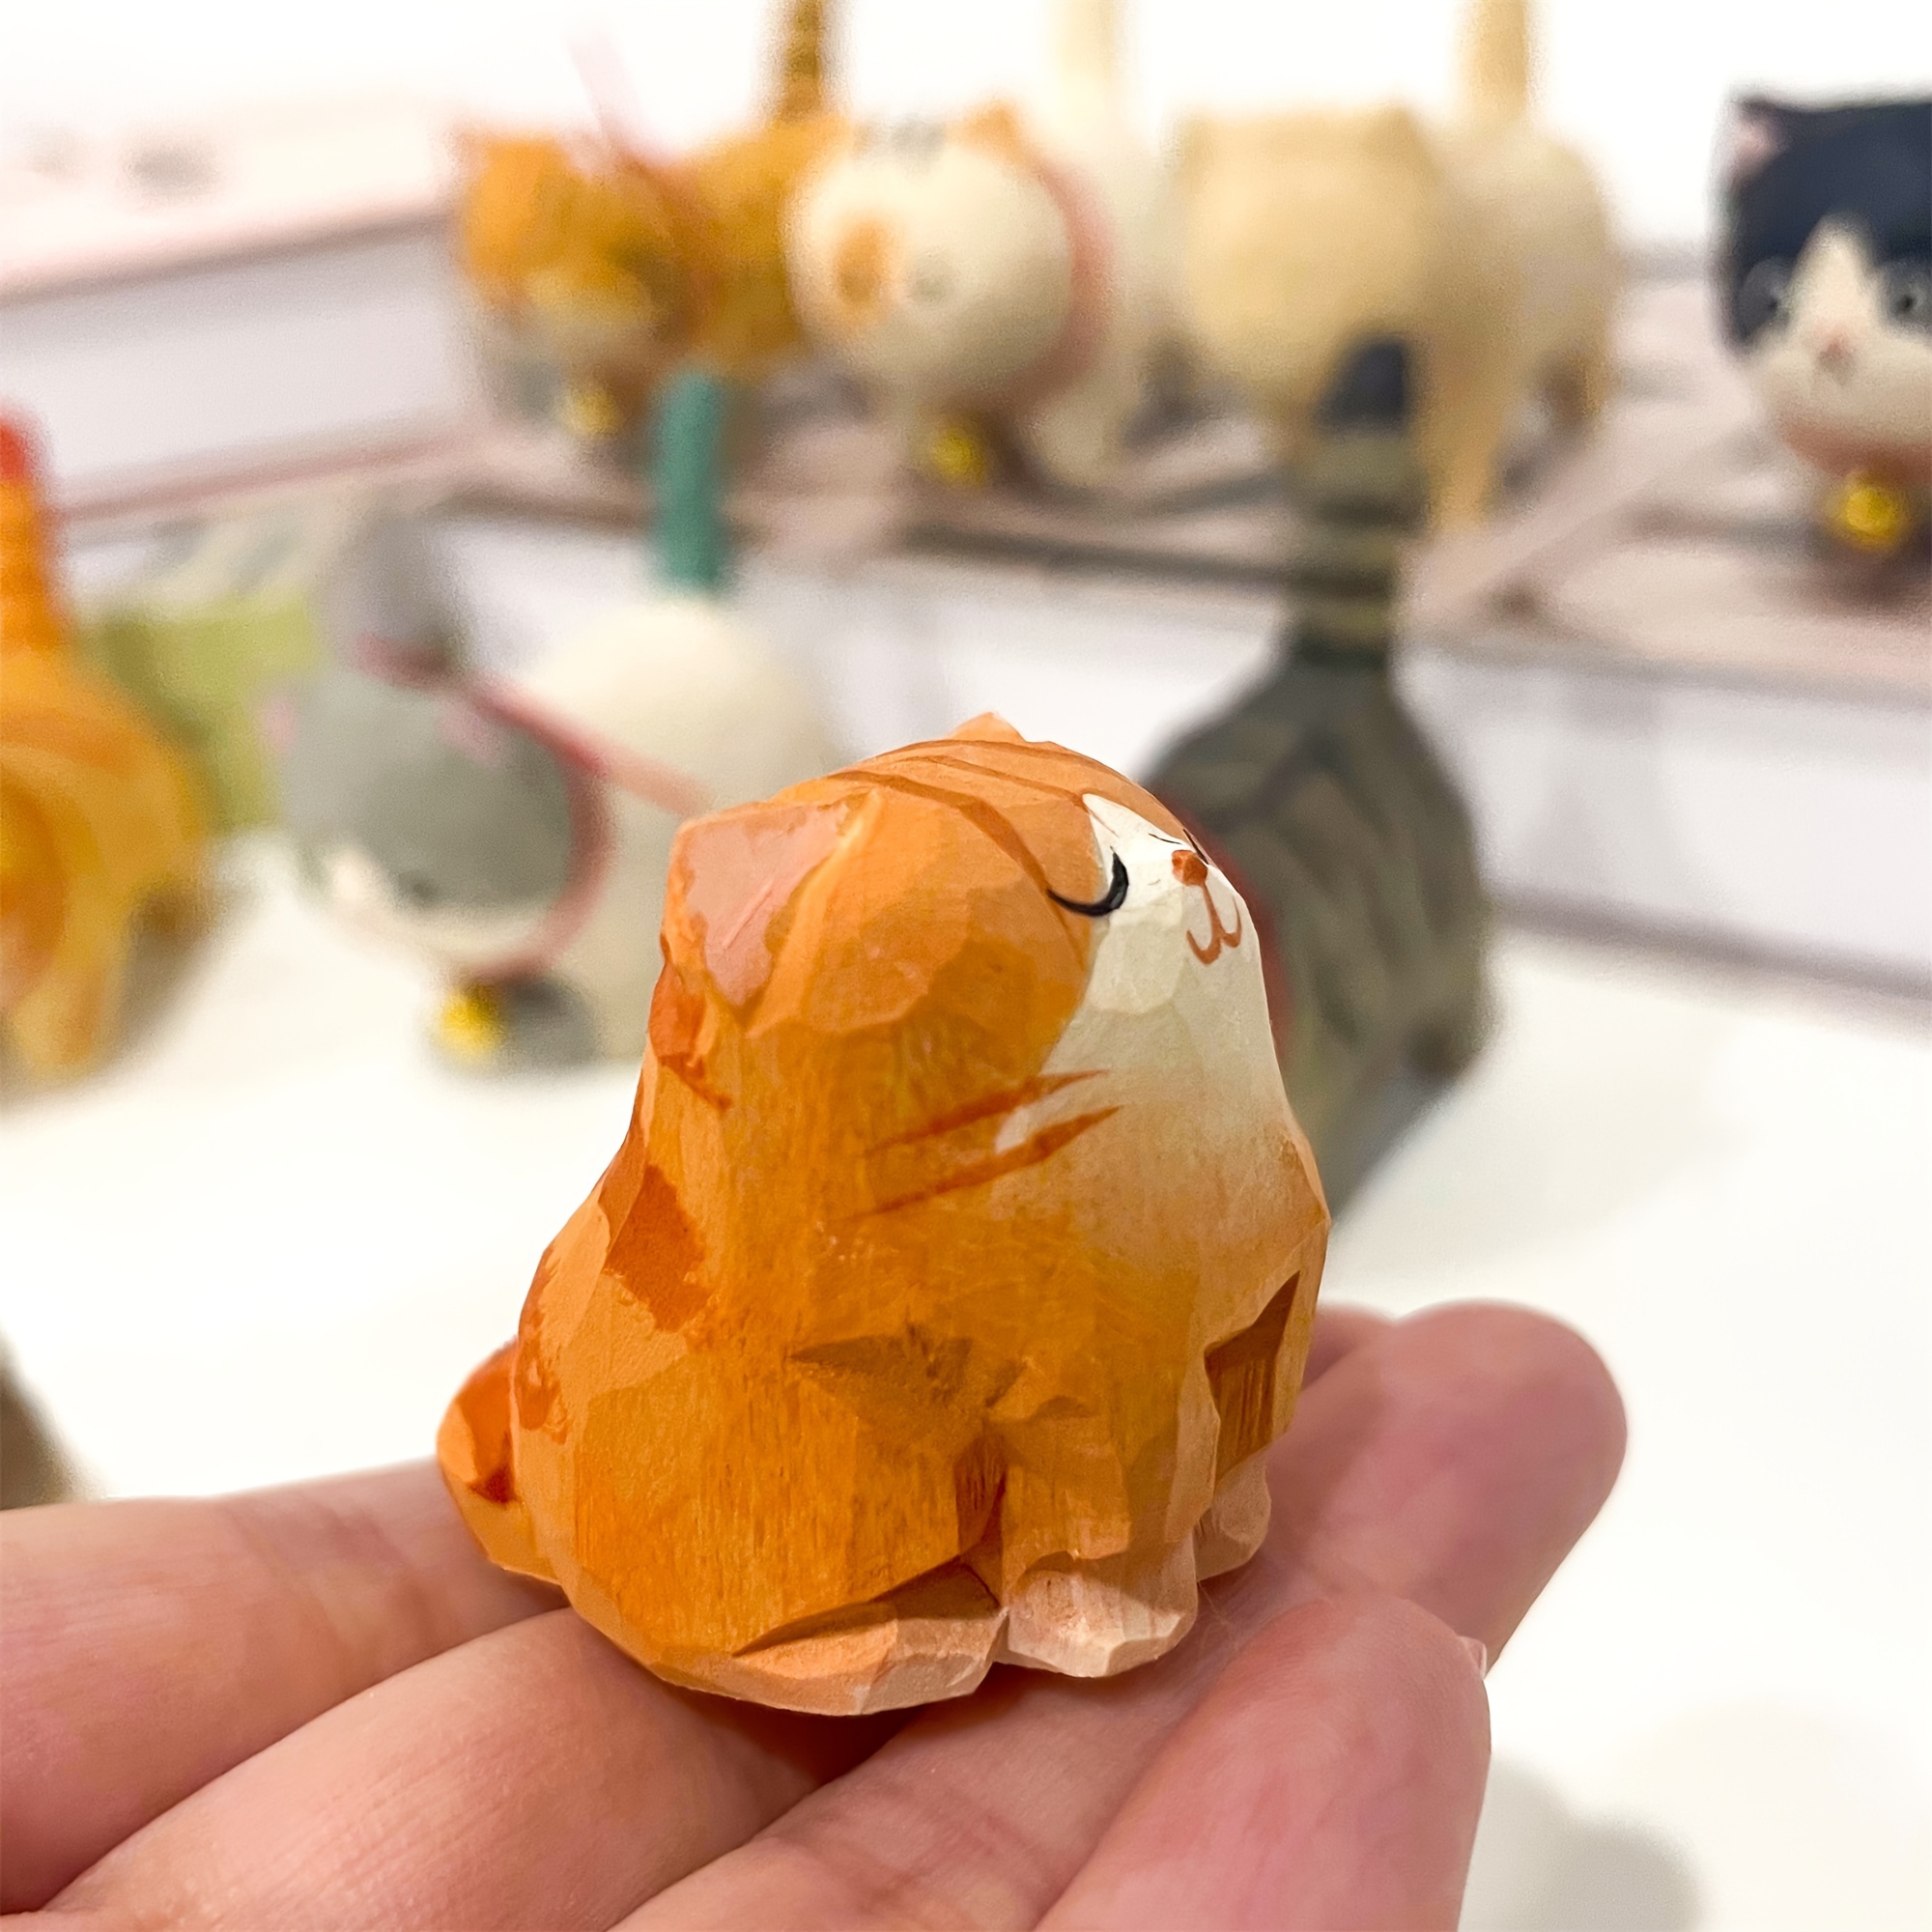 

Hand-carved Painted Orange Cat Figurines | Wooden Animal | Home Decor Sculpture Ornaments | Custom Animal Decor | Personalized Gift | Gifts For Cat Lovers